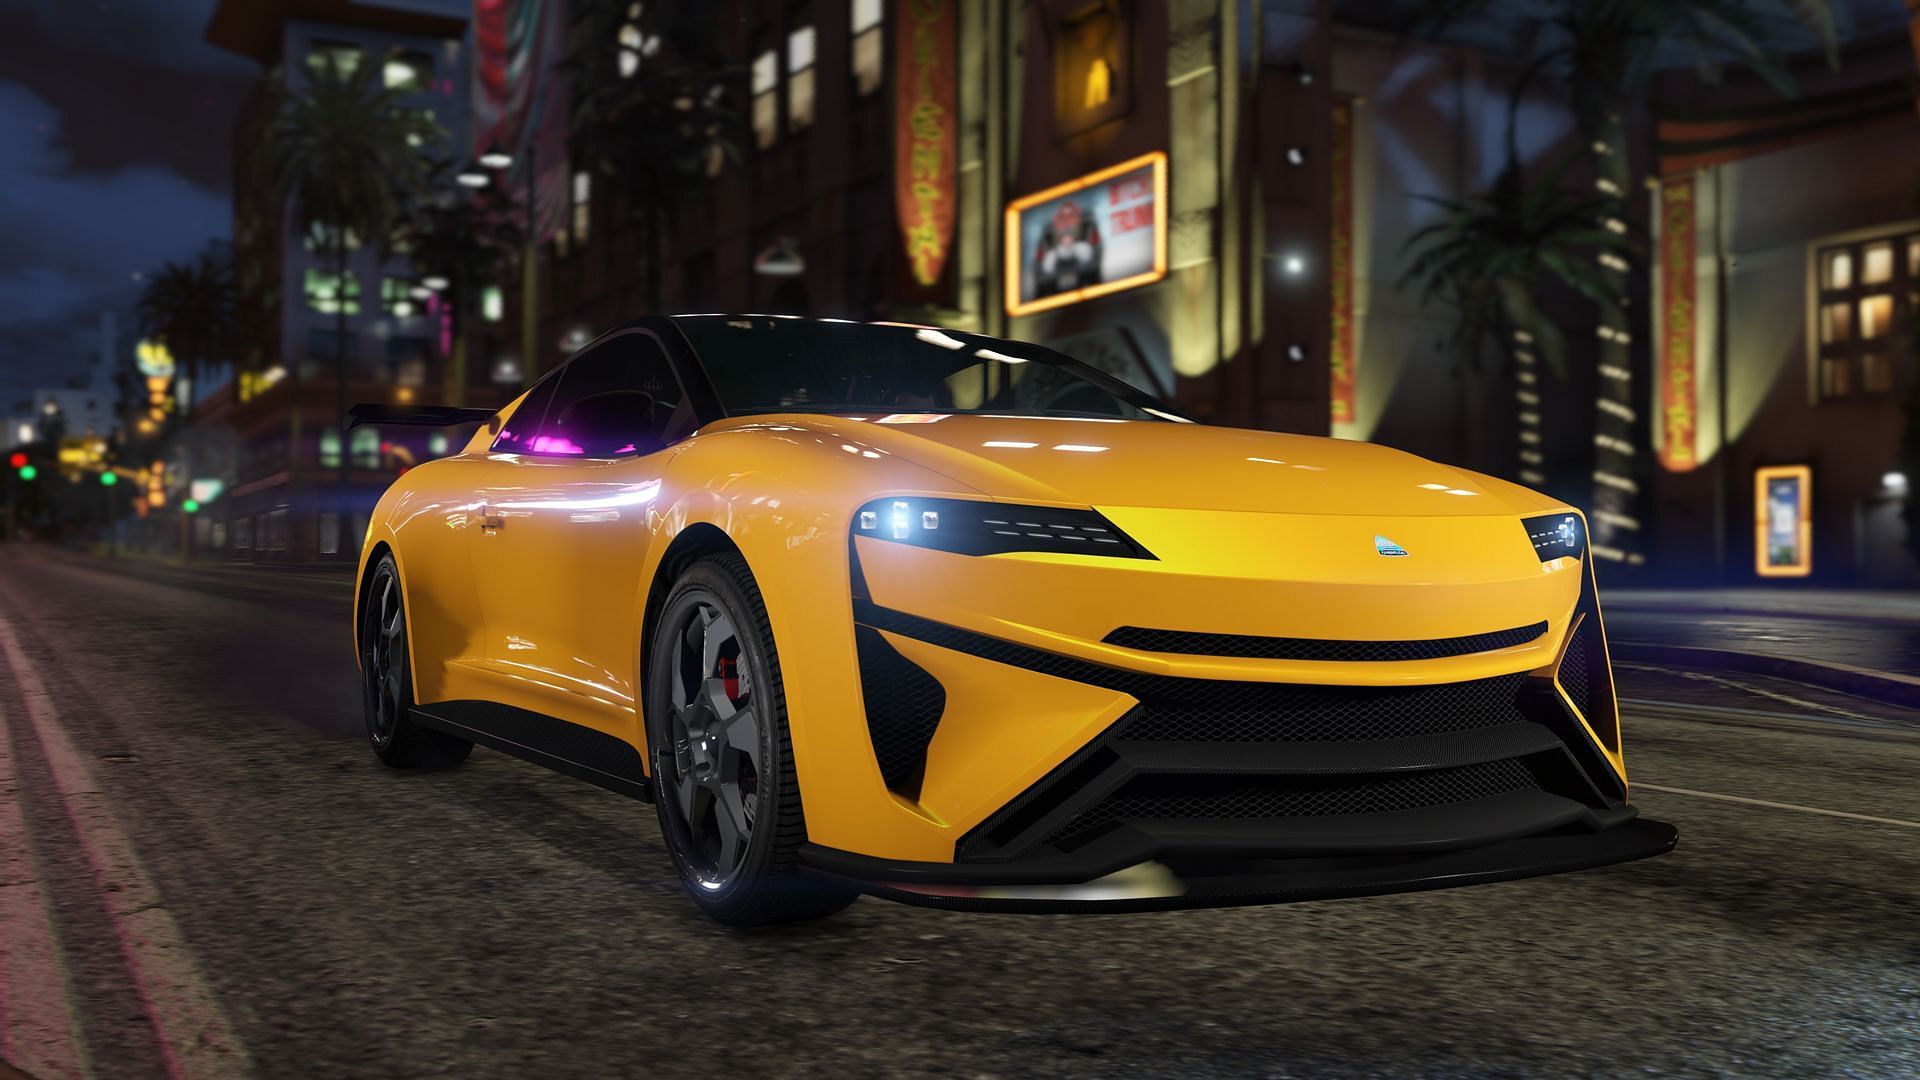 The Imorgon is one of the most expensive options in this vehicle class in GTA Online